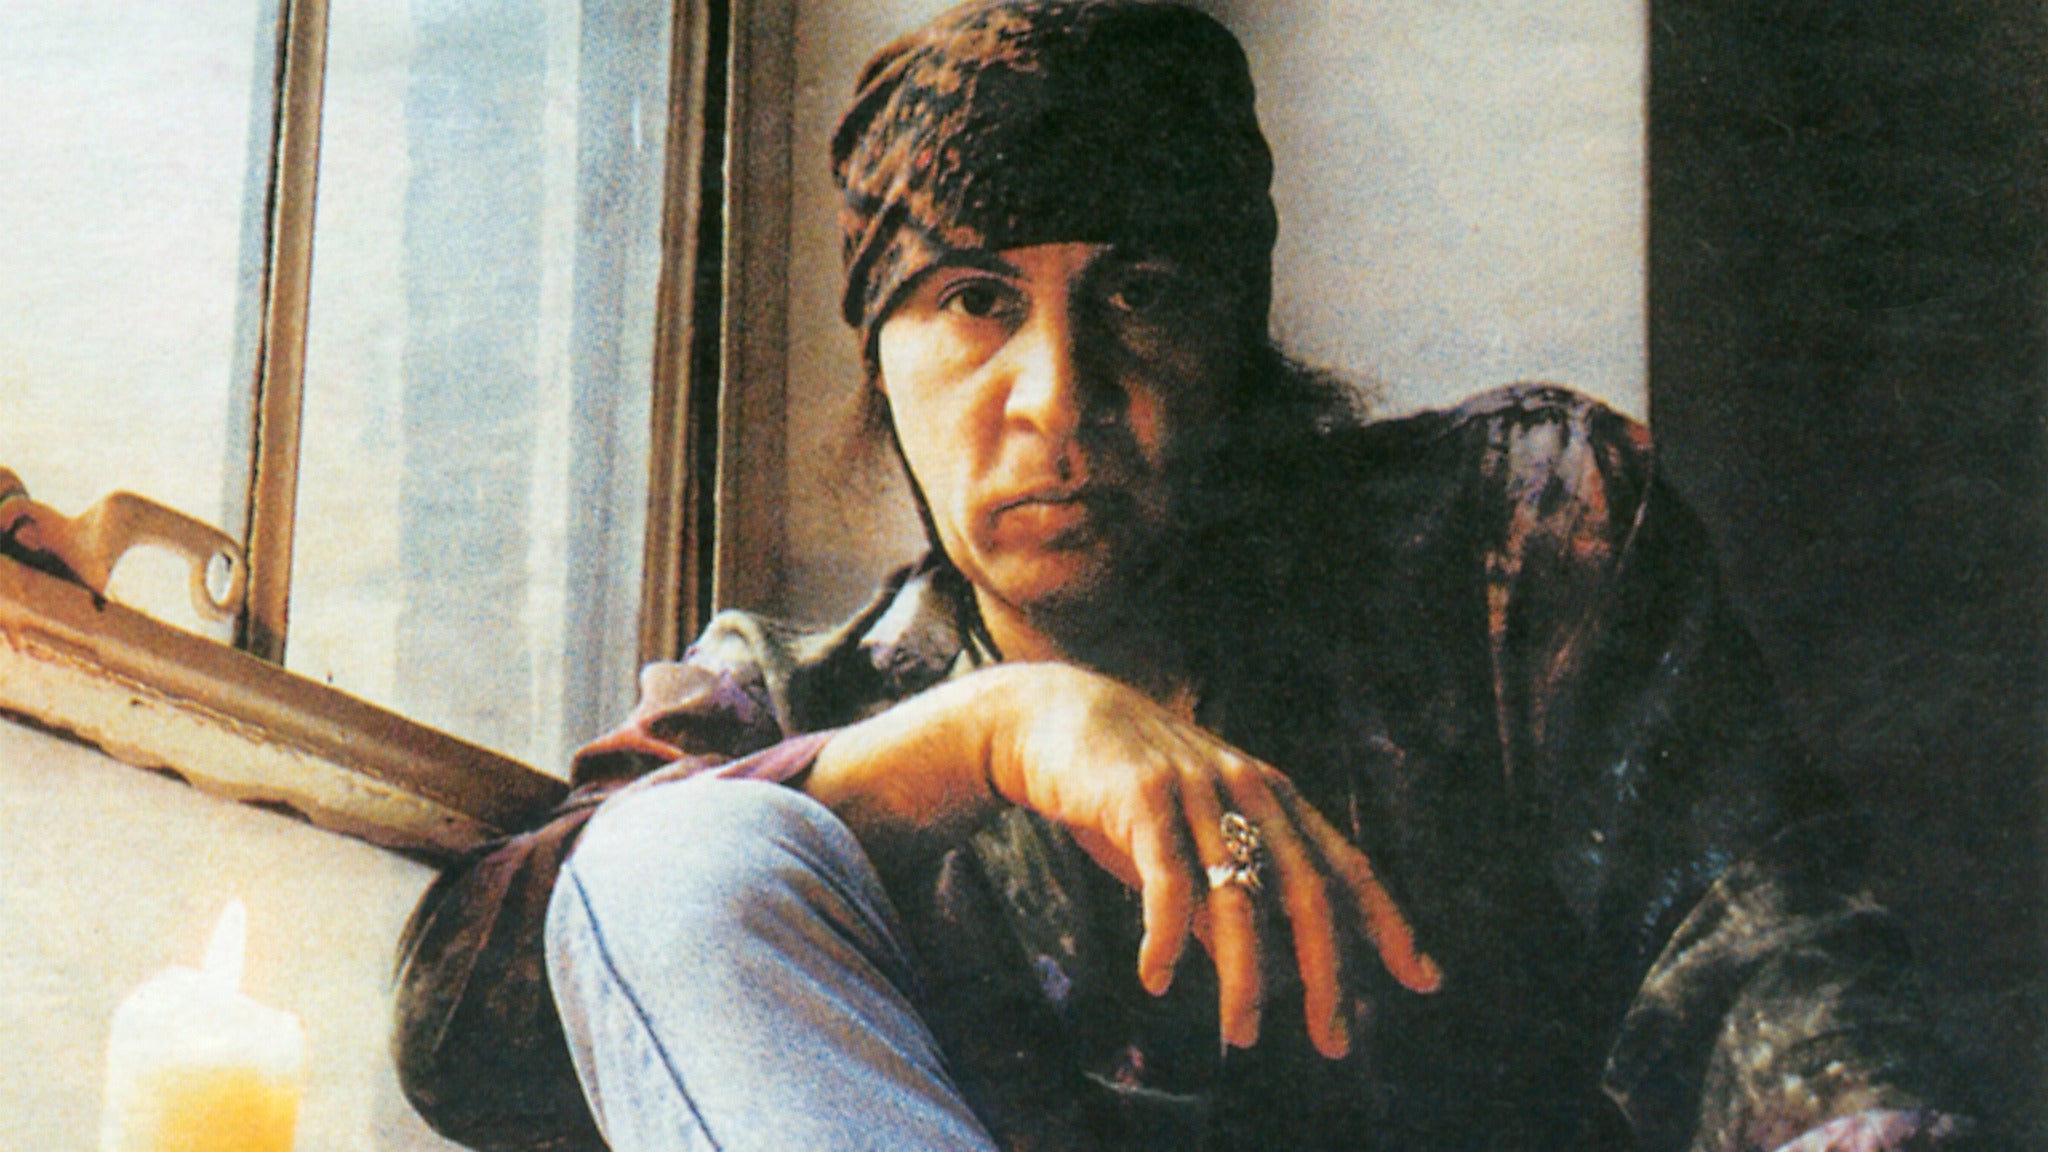 Steven Van Zandt And The Disciples Of Soul pre-sale password for show tickets in Red Bank, NJ (Hackensack Meridian Health Theatre at the Count Basie Center )